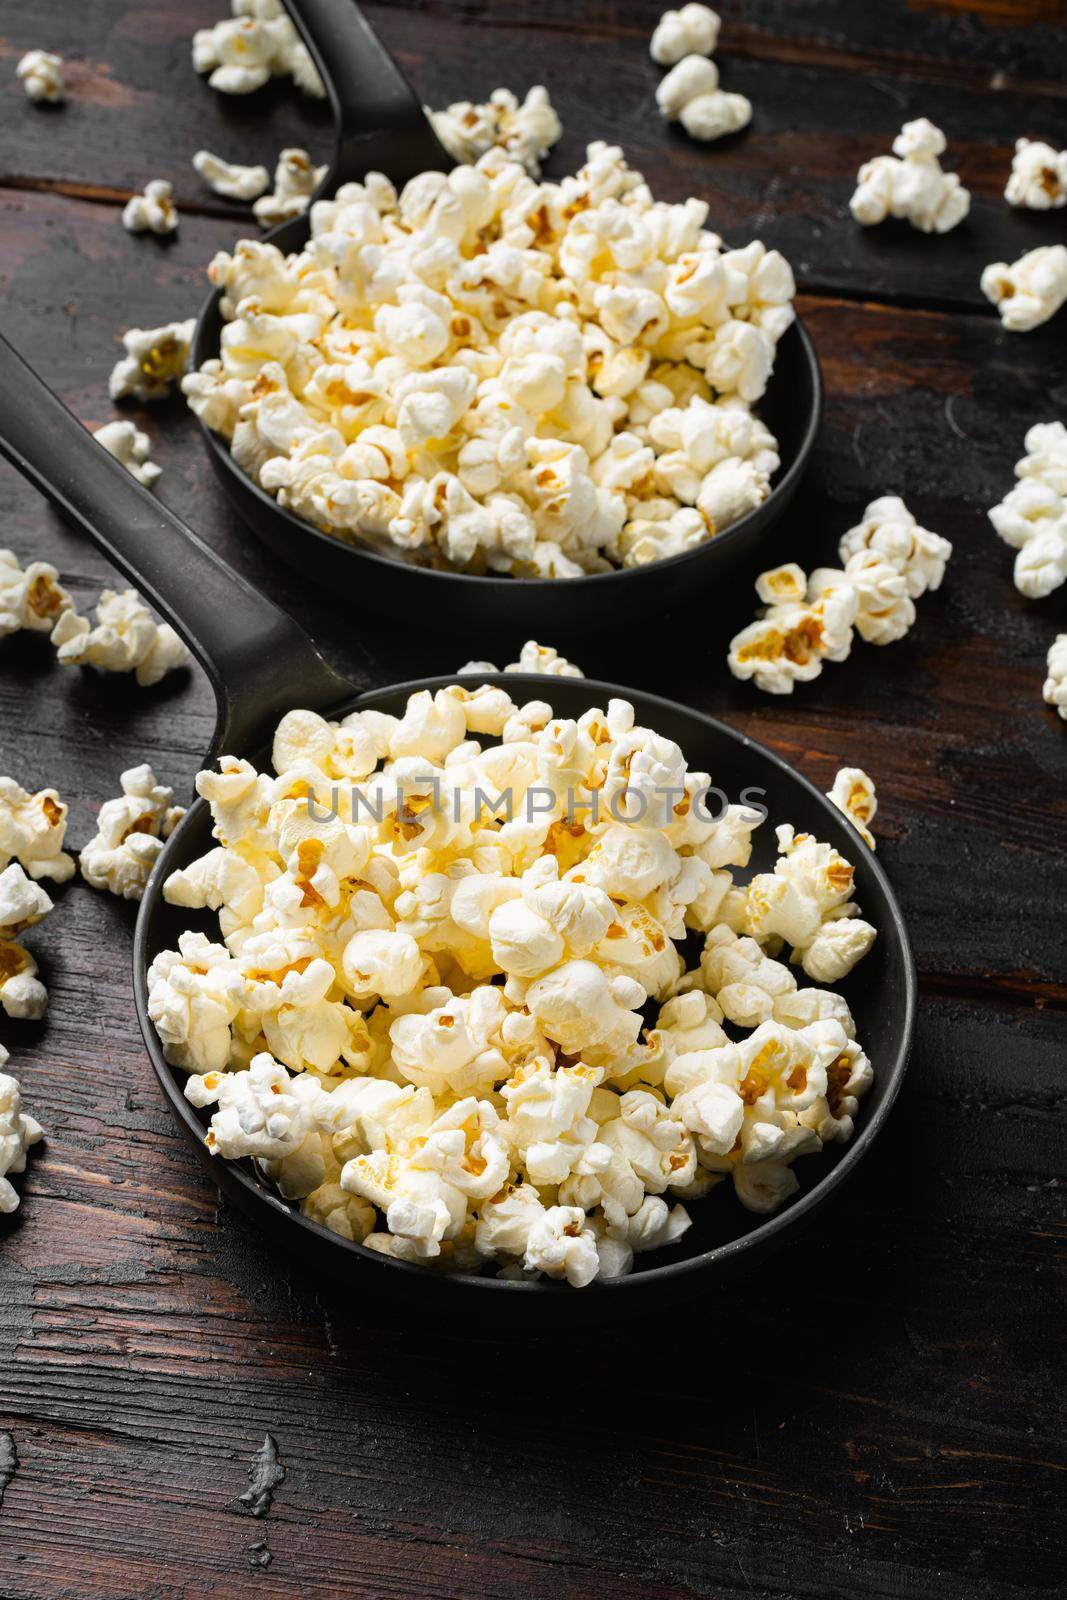 Prepared salted popcorn on old dark wooden table background by Ilianesolenyi